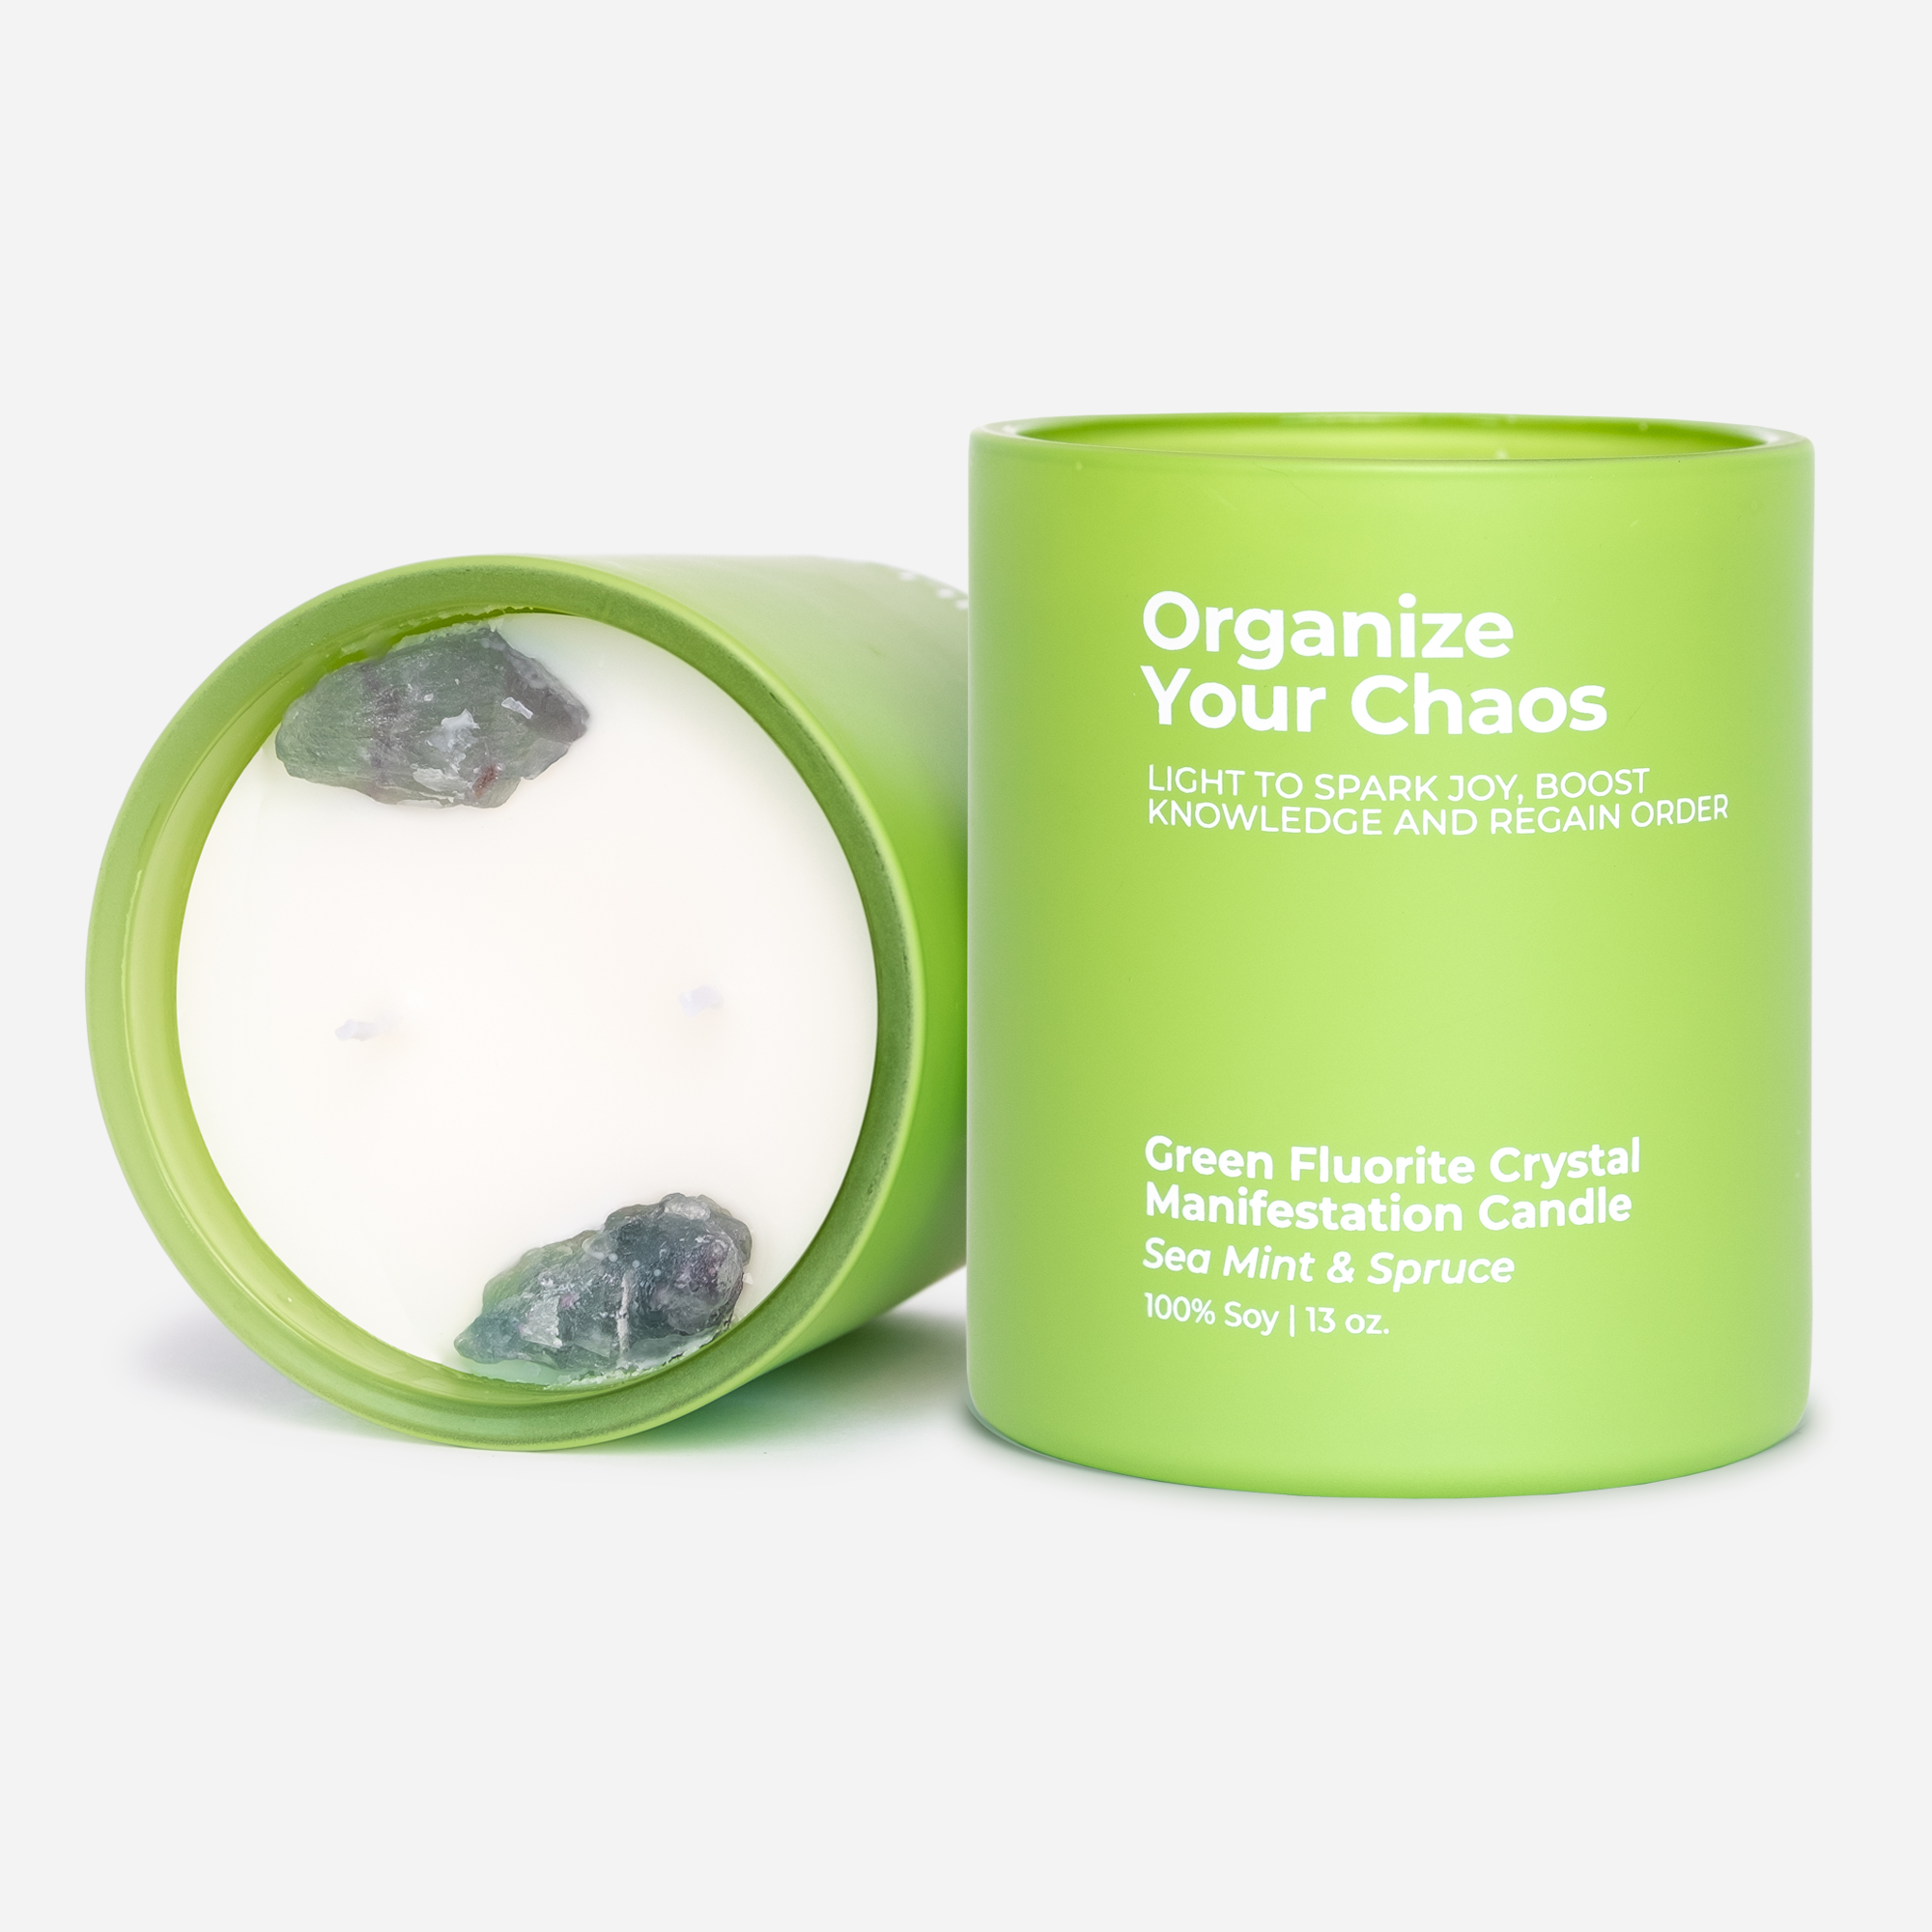 Organize Your Chaos - Green Fluorite Crystal Manifestation Candle